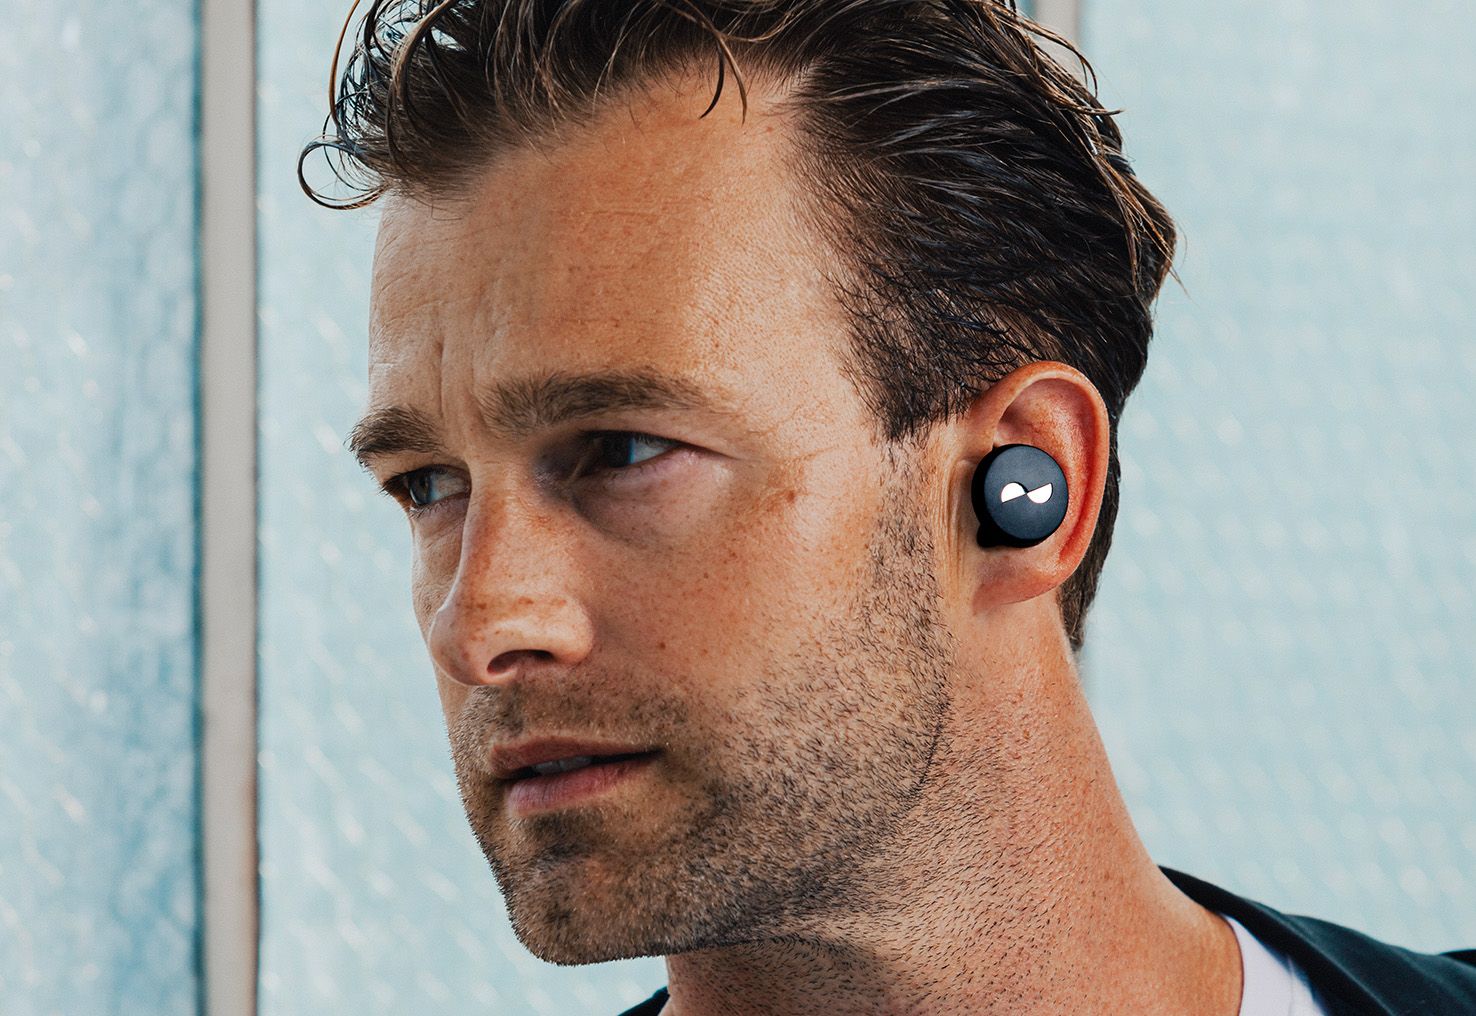 Person covered in sweat with NURATRUE earbuds in ears